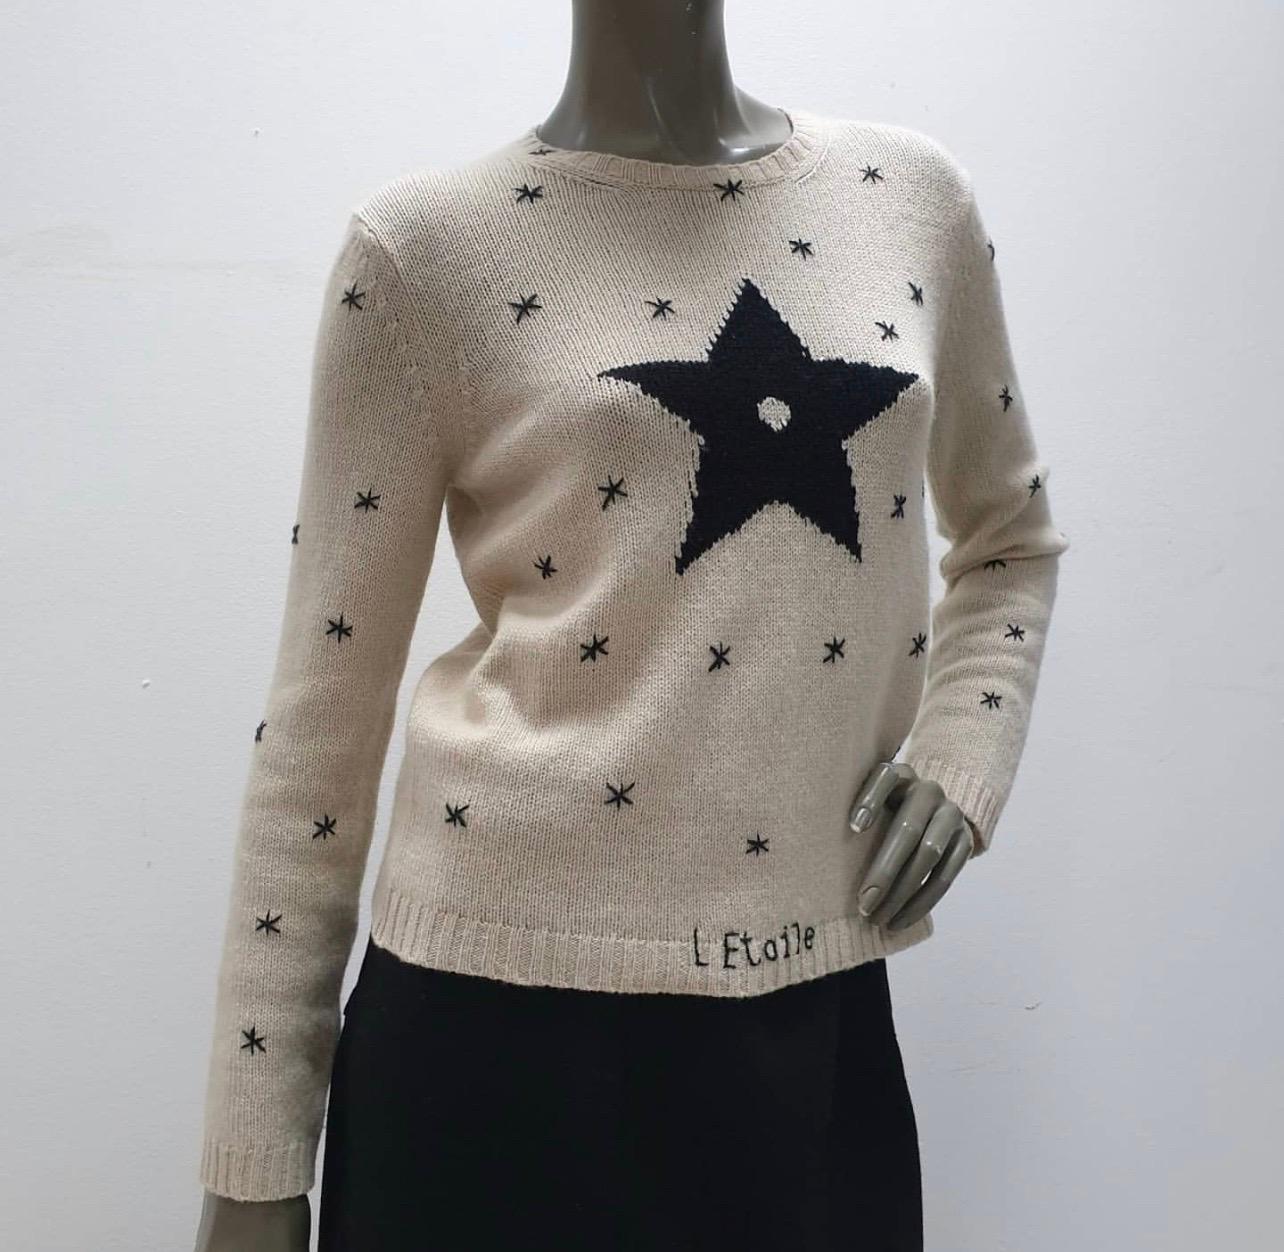 From the 2018 Cruise Collection.

Tan Christian Dior lightweight intarsia cashmere sweater with star L'Etoile intarsia design throughout front, rib knit trim and crew neckline.

Condition is excellent. 

 Sz.38

For buyers from EU we can provide